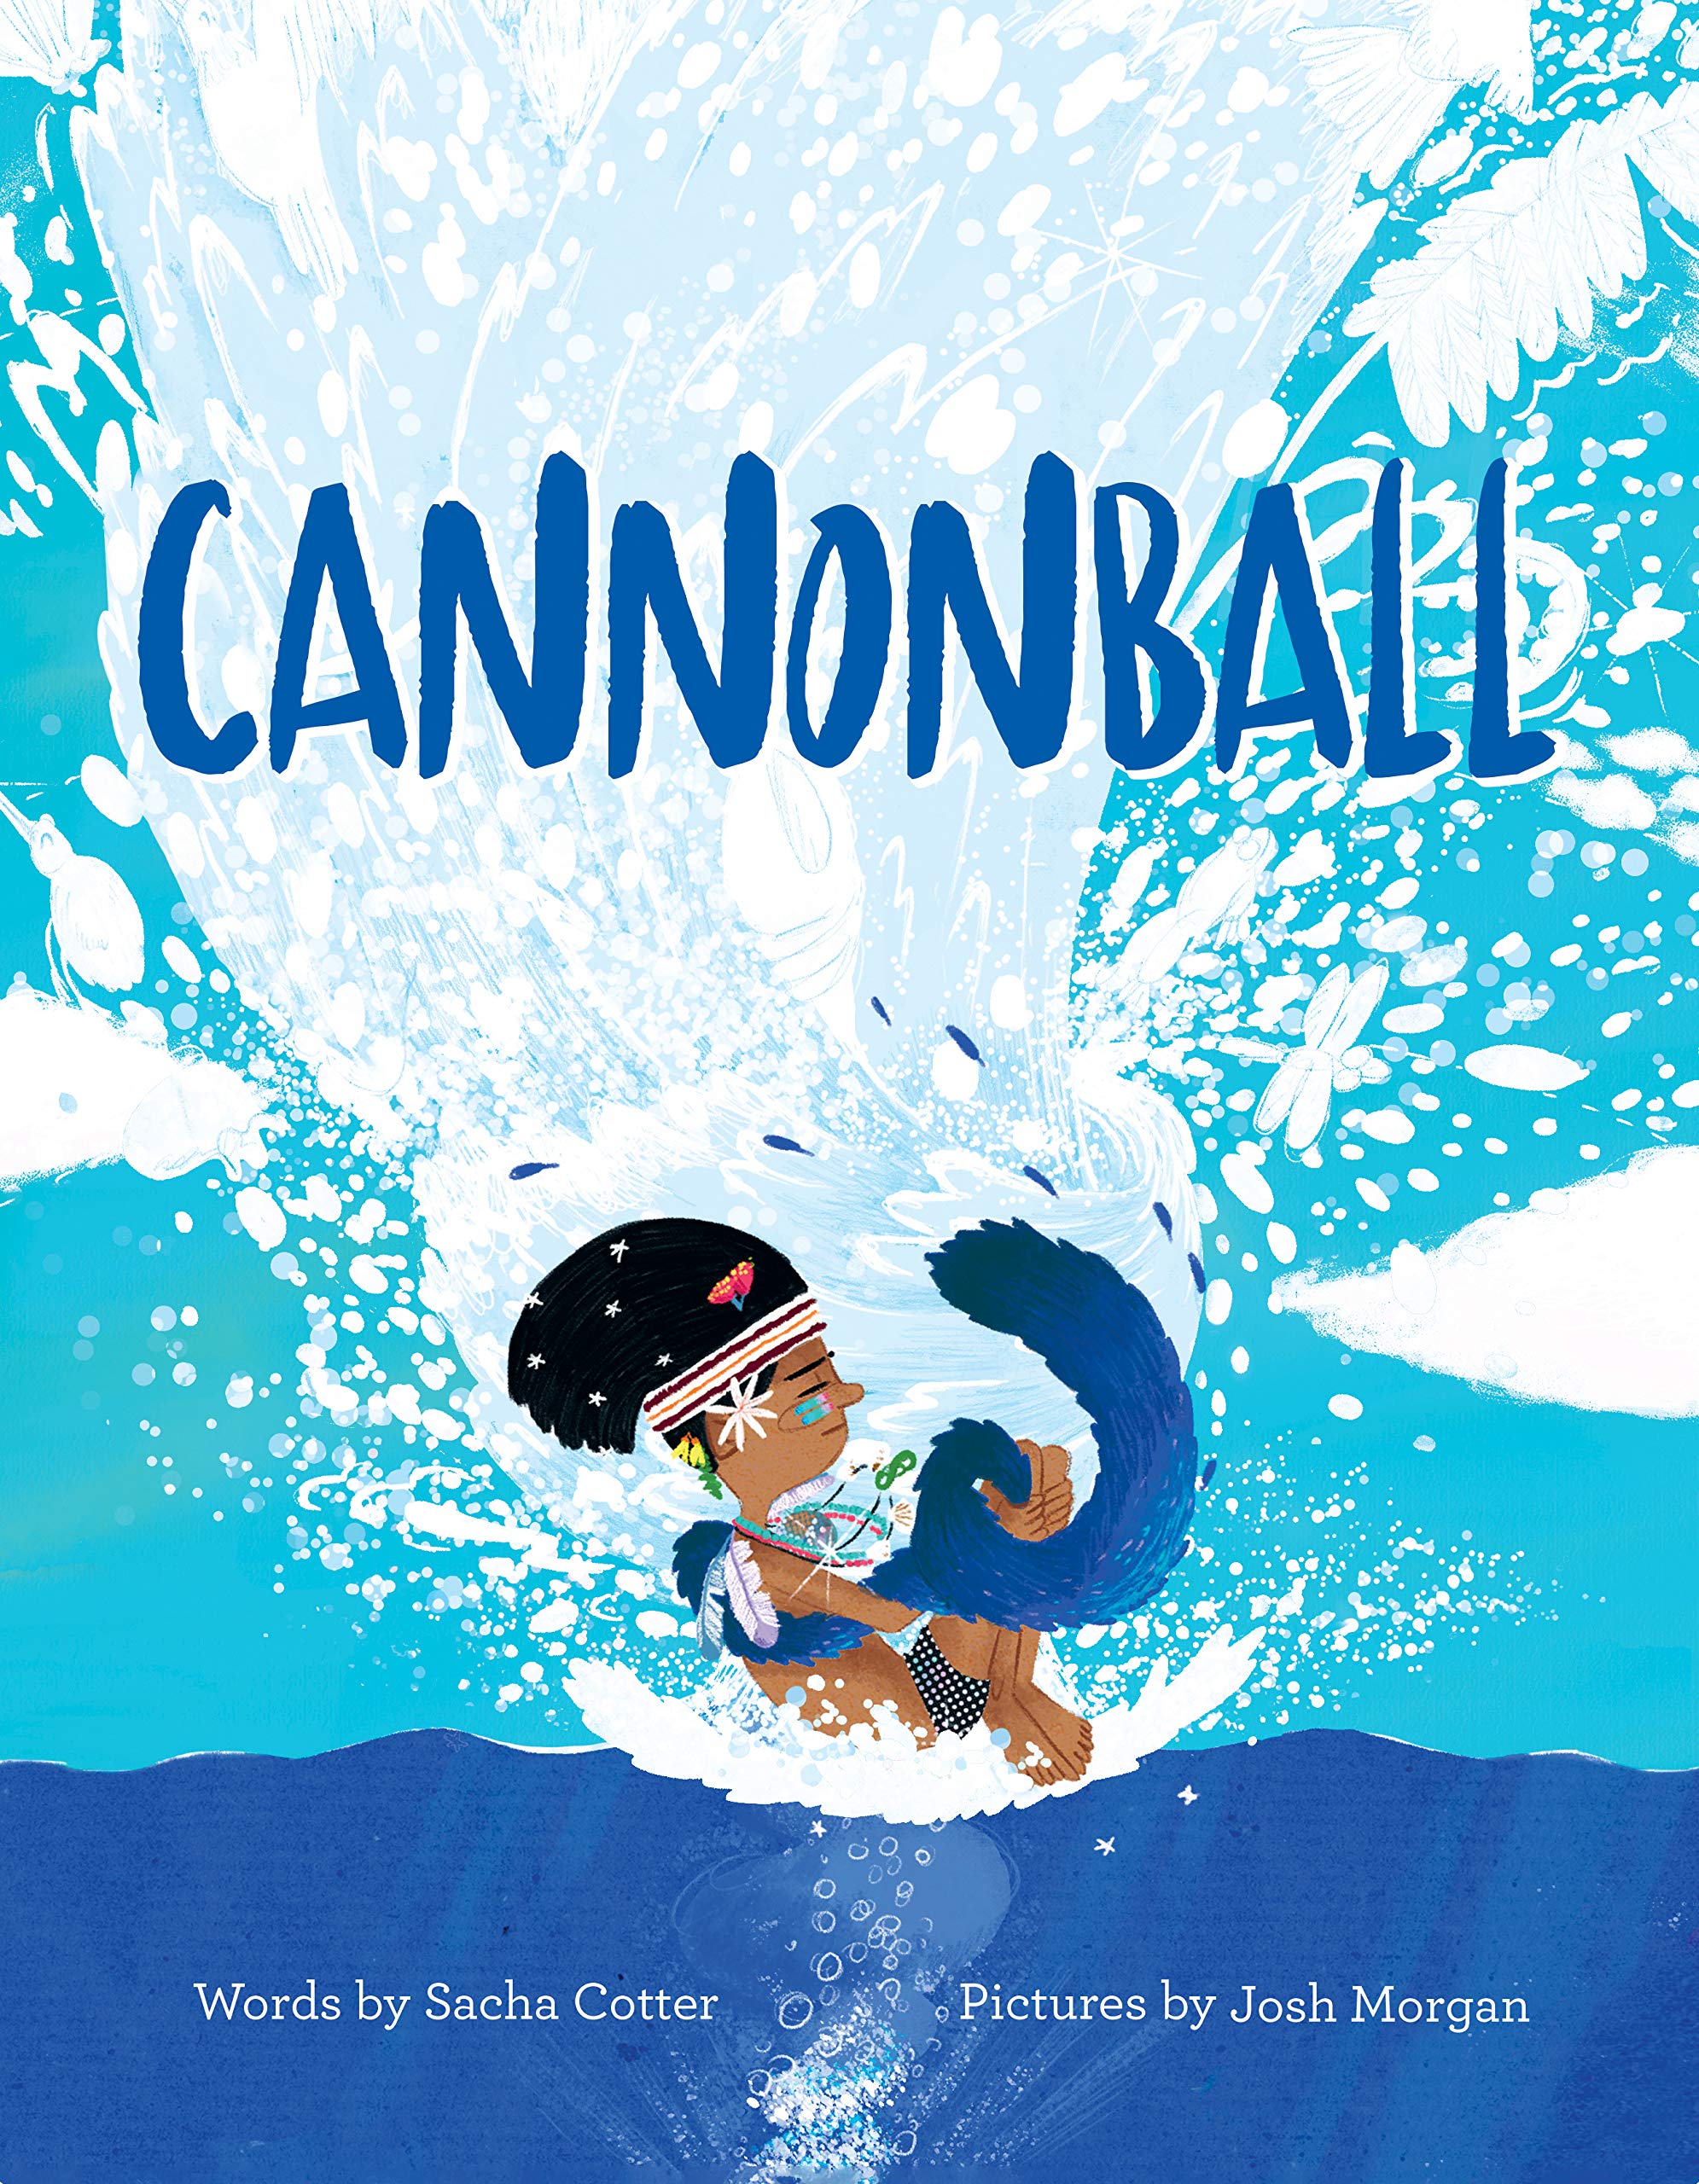 speech and language teaching concepts for Cannonball in speech therapy